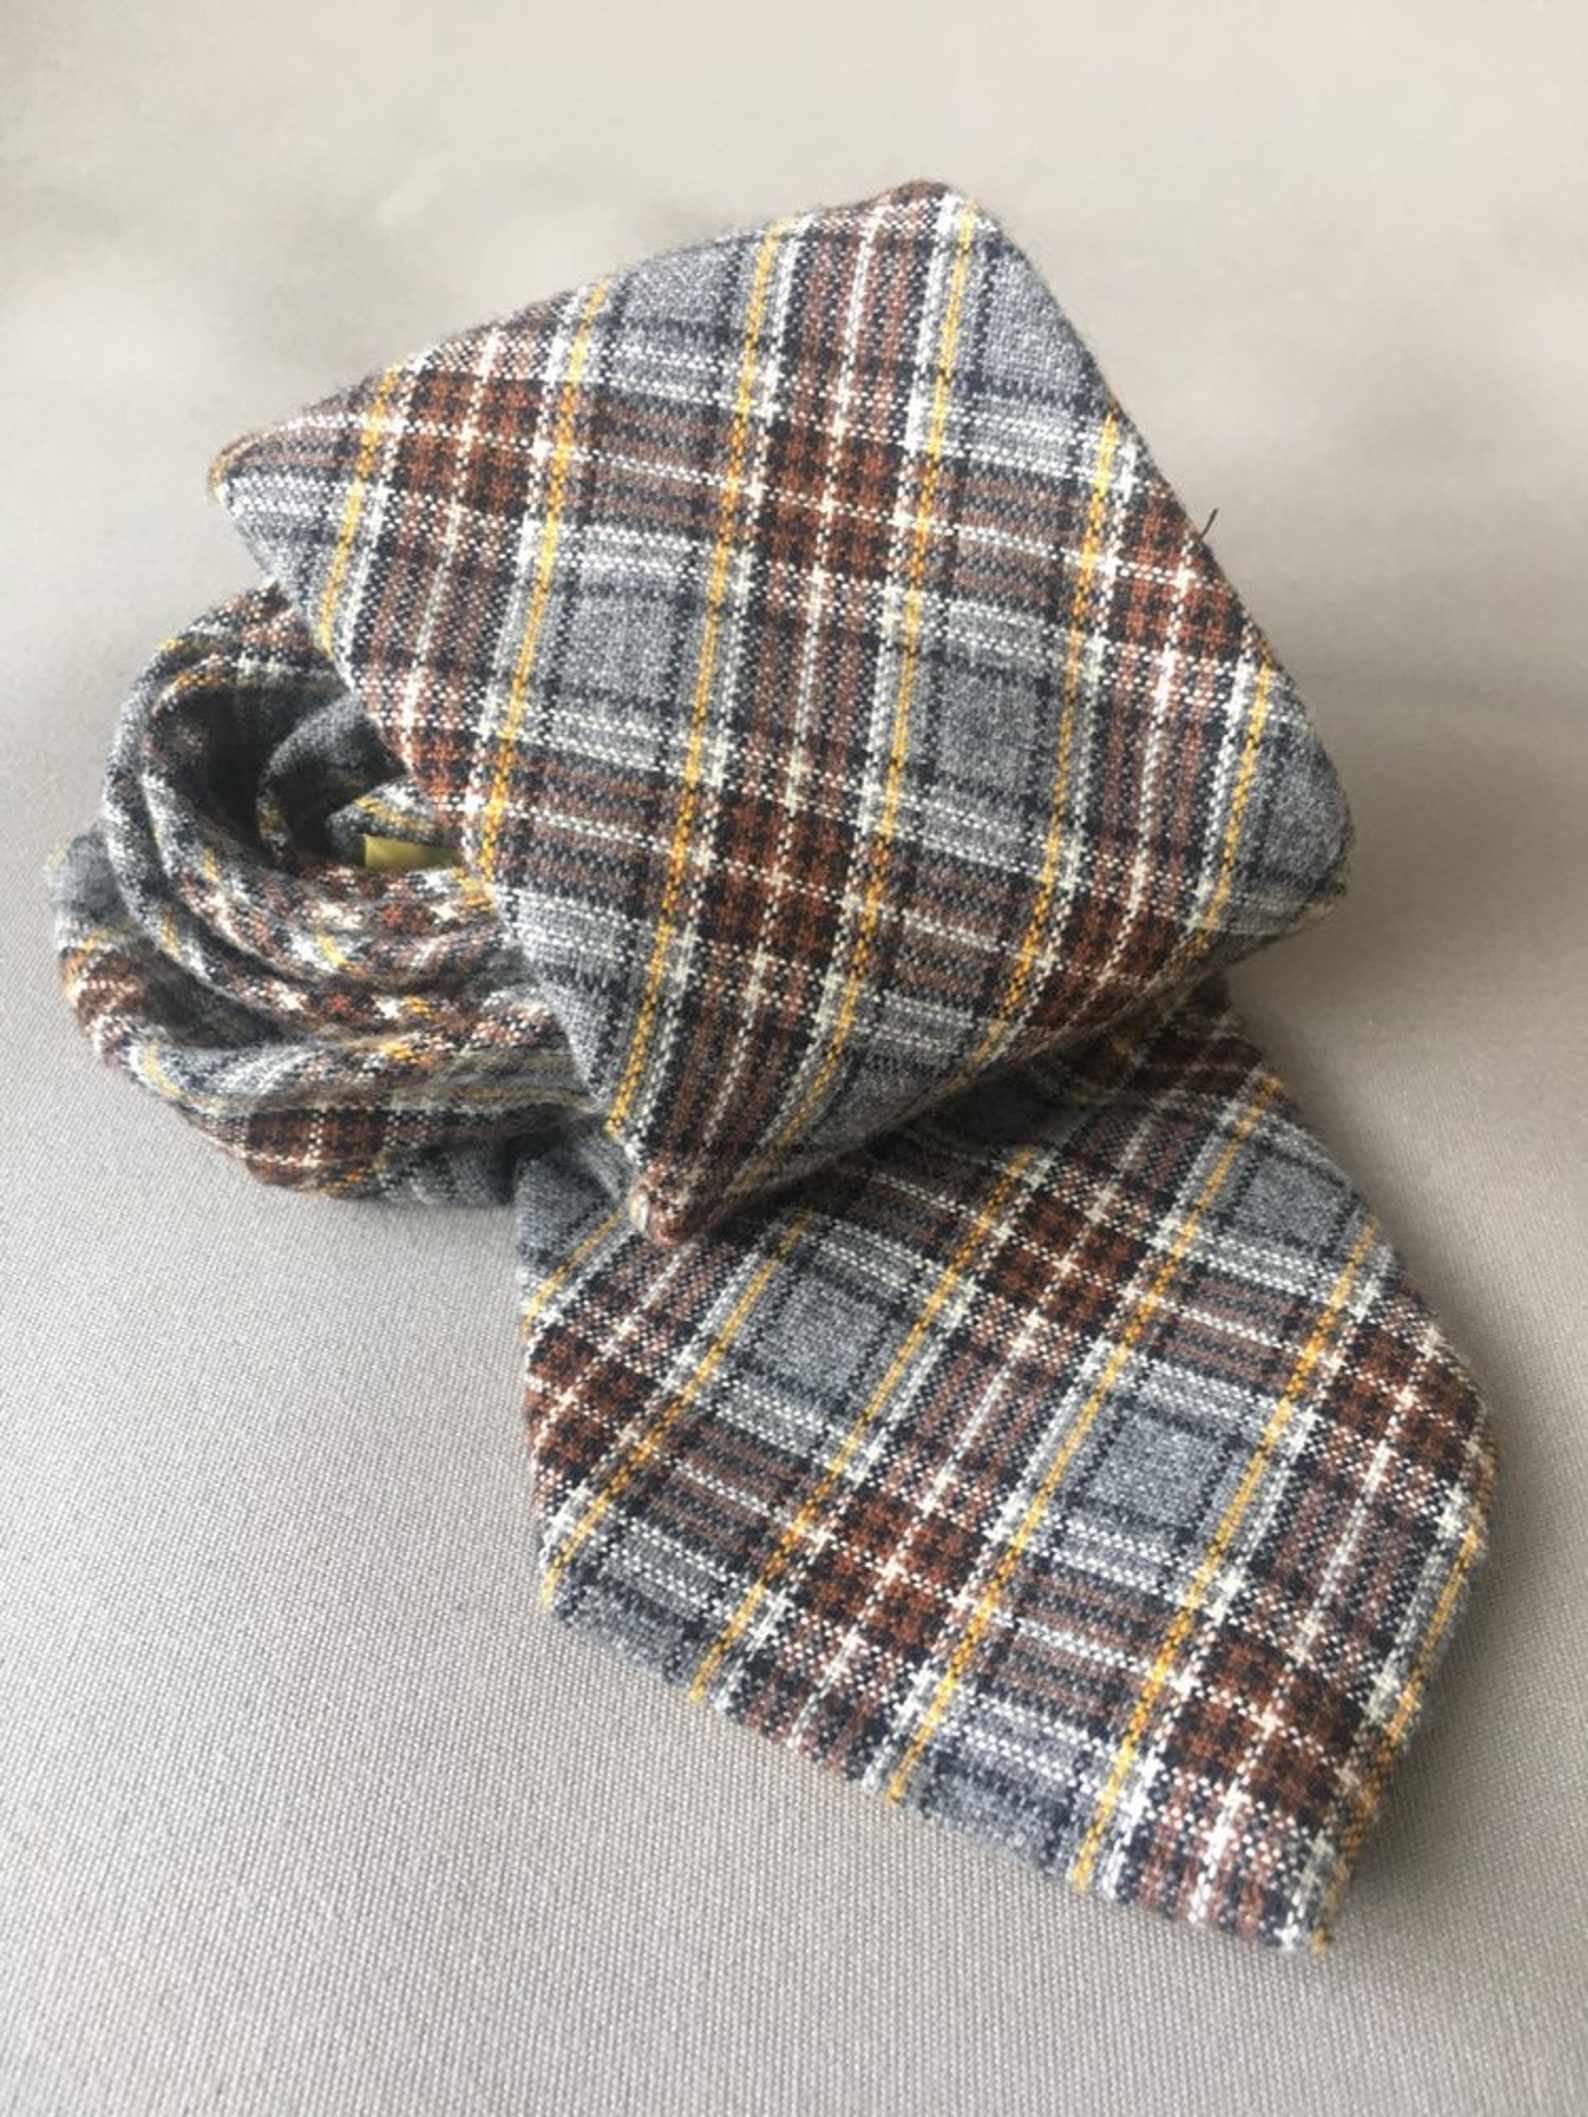 Wembly Wool Plaid Tie Traditional Tartan 1970's | Etsy